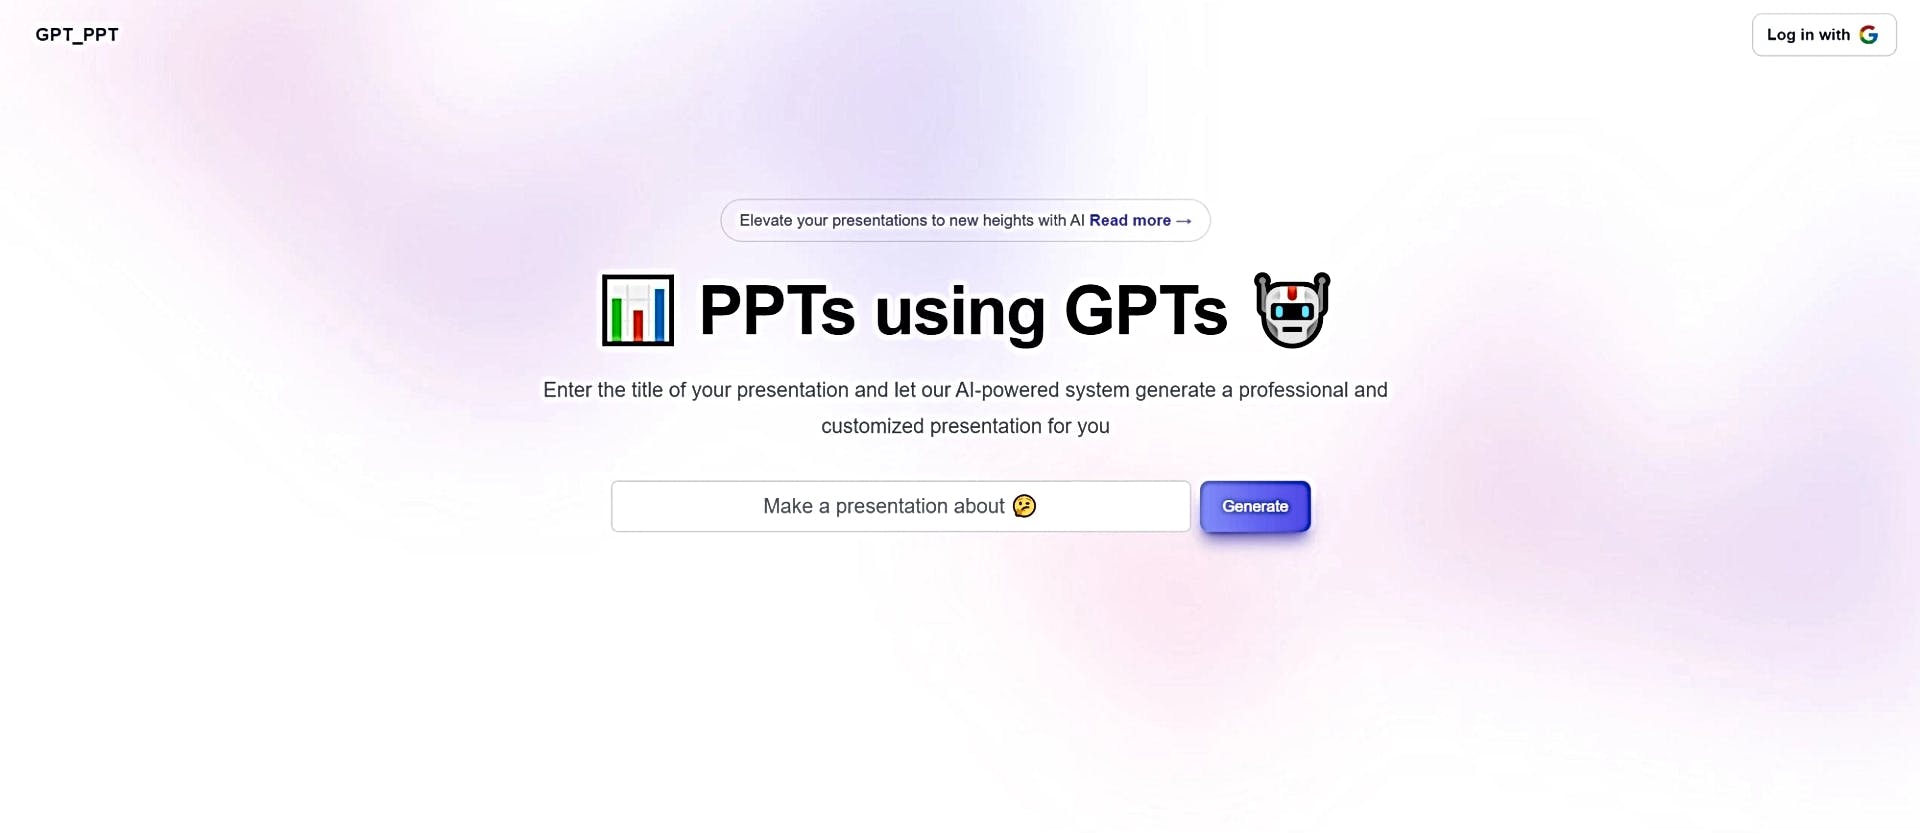 GPT-PPT featured